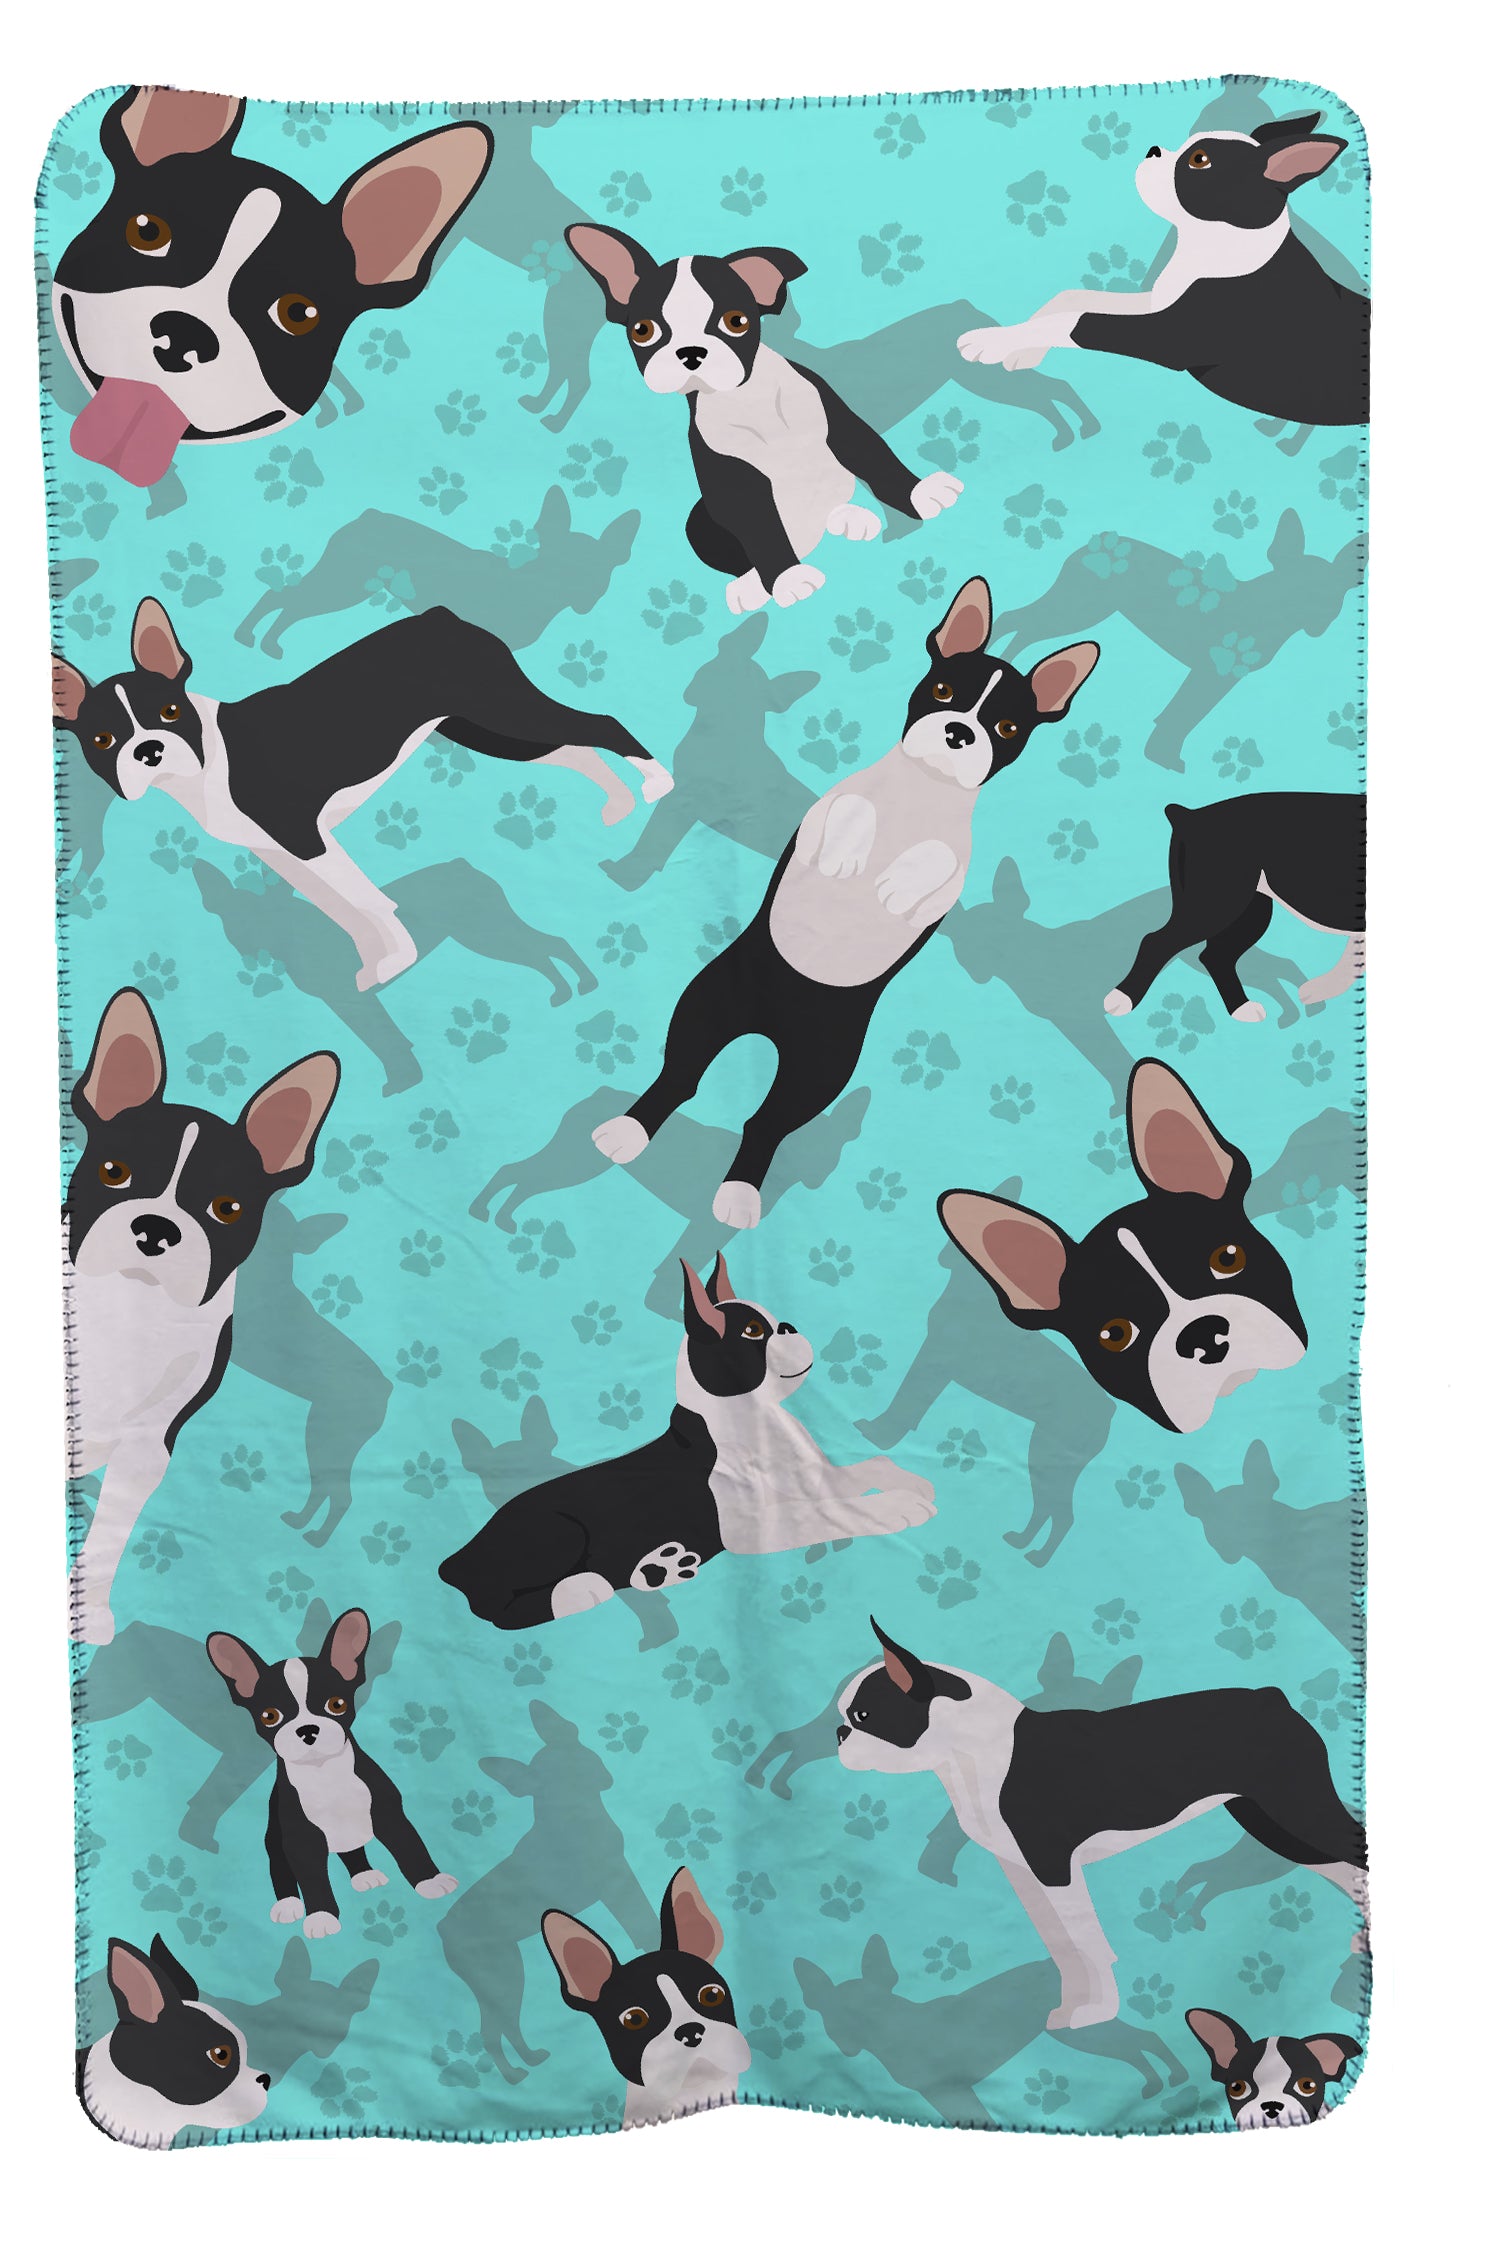 Buy this Boston Terrier Soft Travel Blanket with Bag